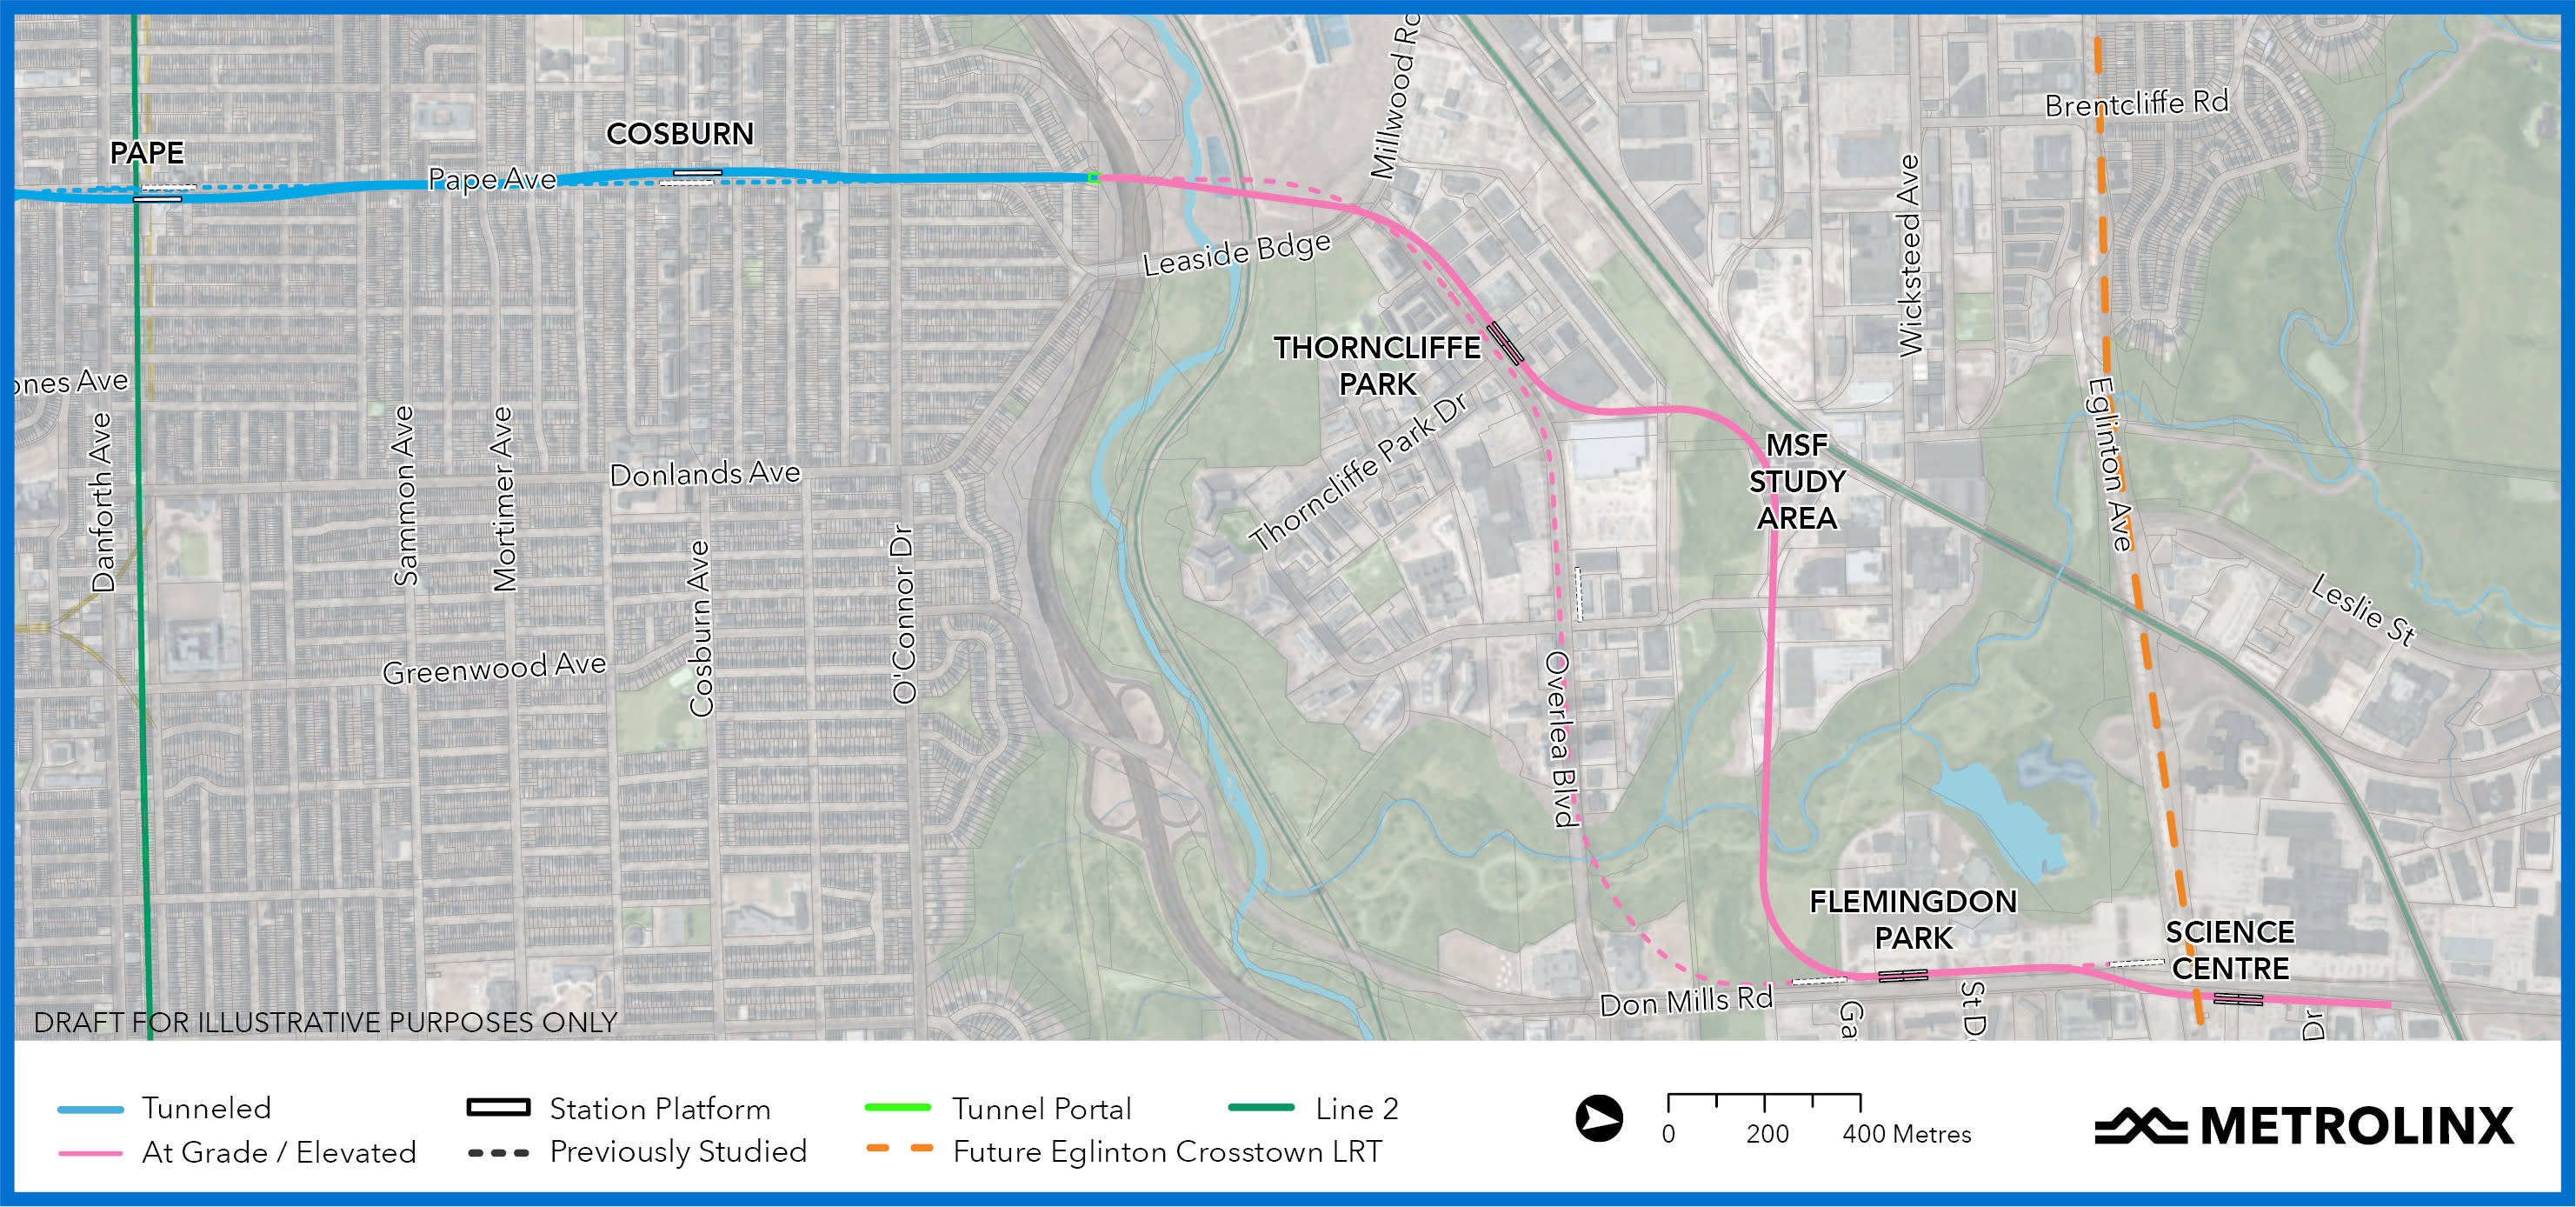 Updated plans for the Ontario Line’s North segment: A better fit for the community